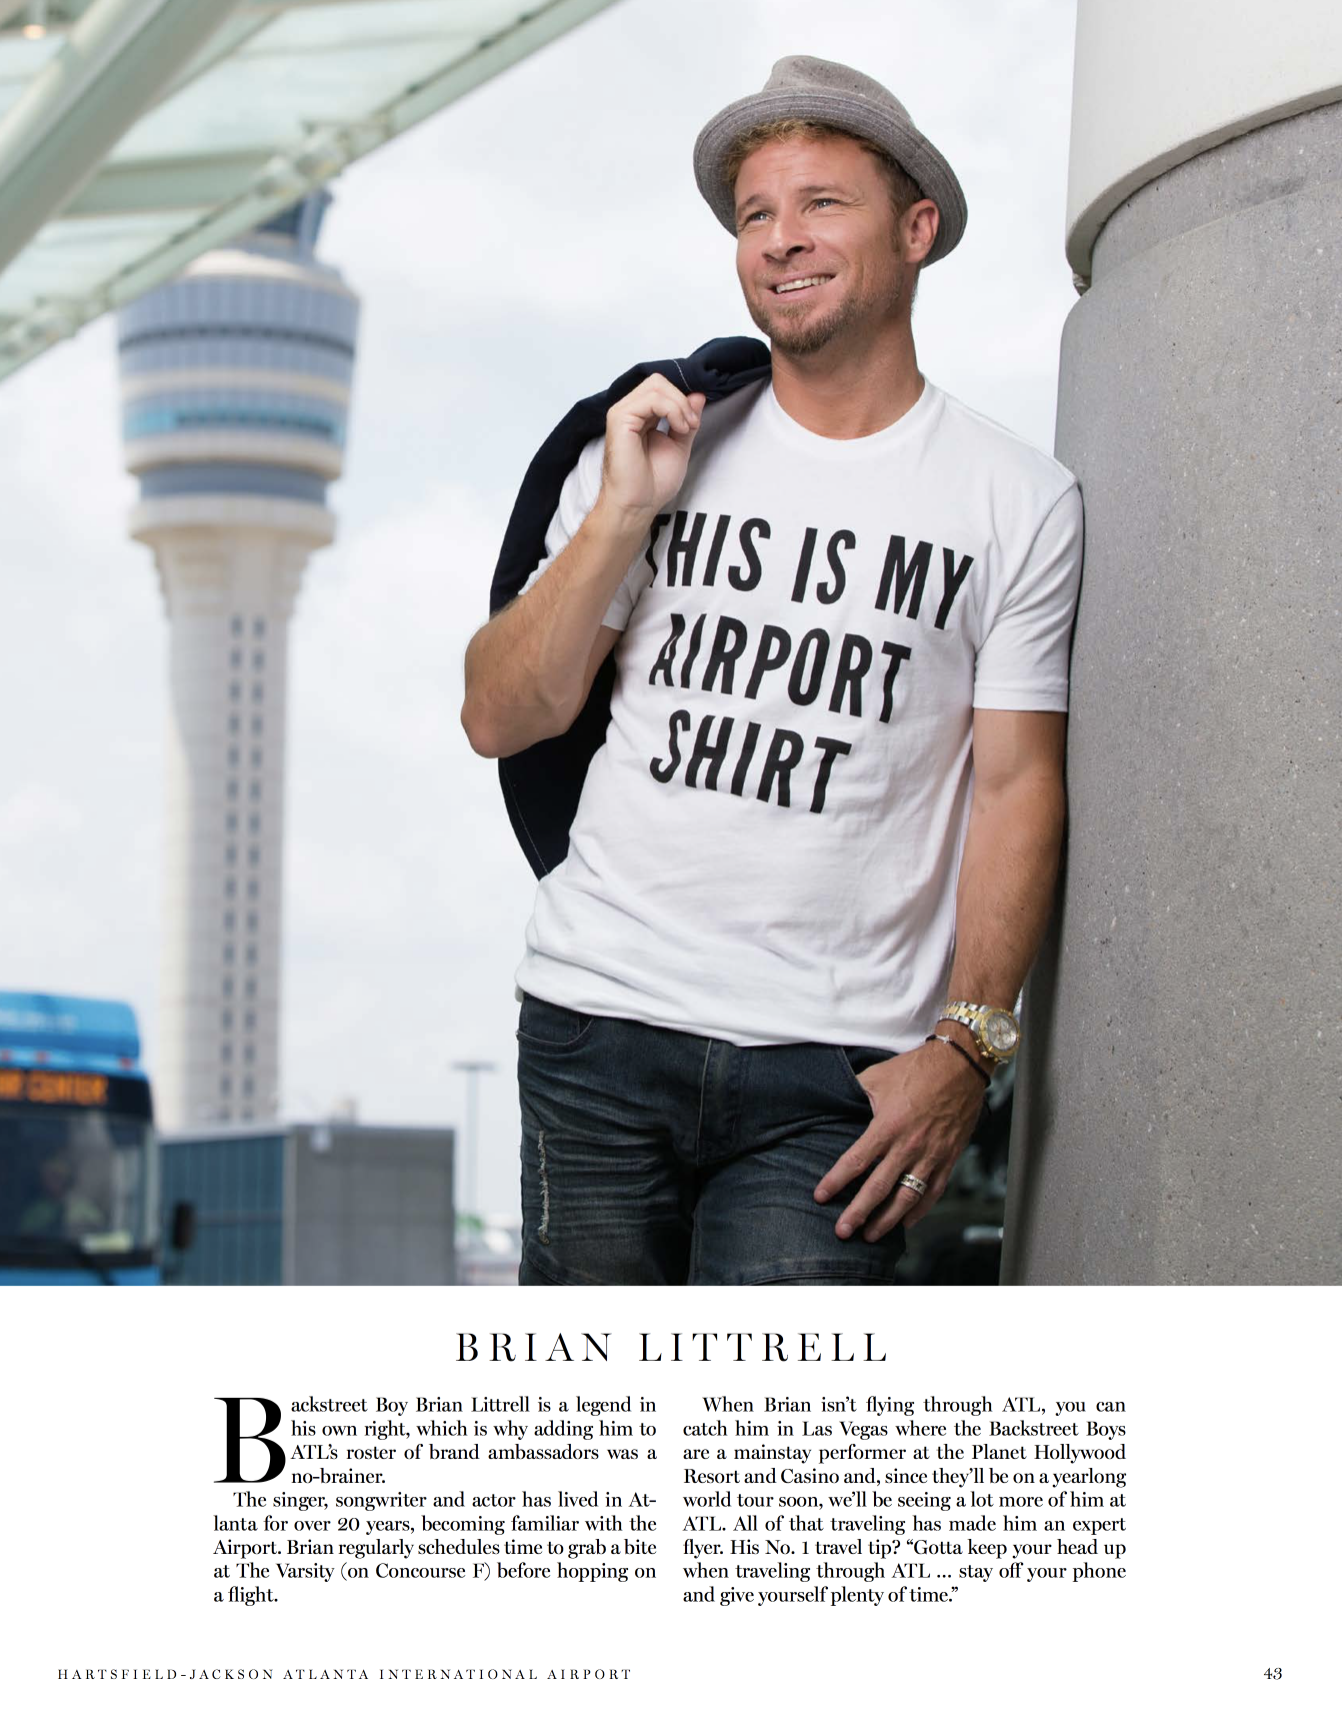 Brian featured in #ATLSkypointe ✈️